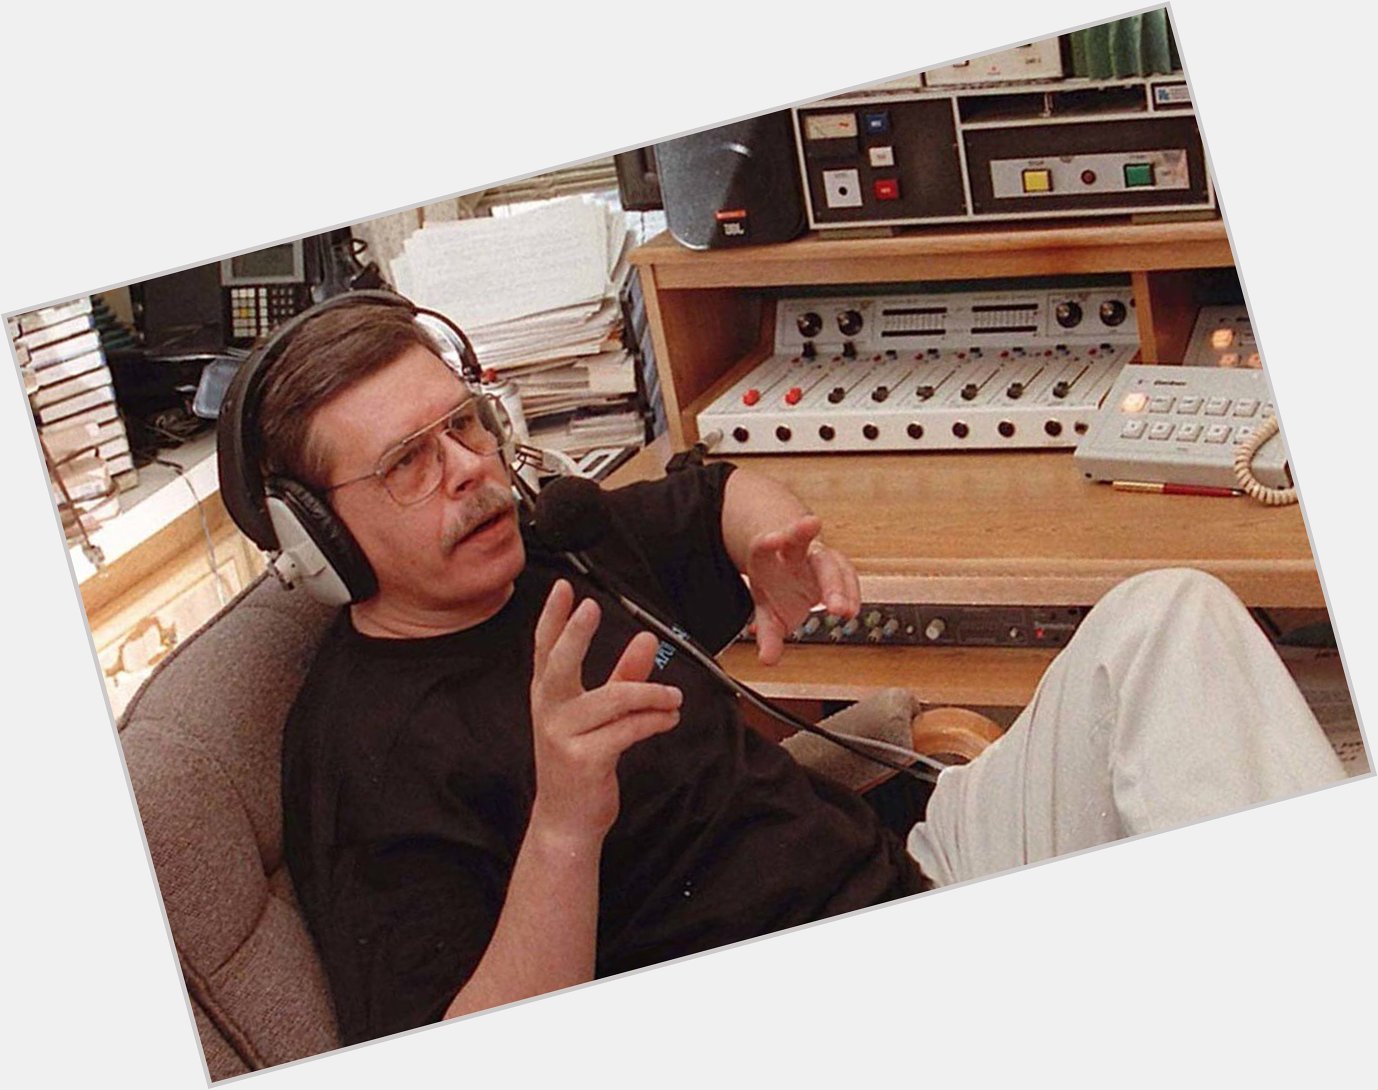 Happy bday to radio legend Art Bell. RIP
Nobody was better. 